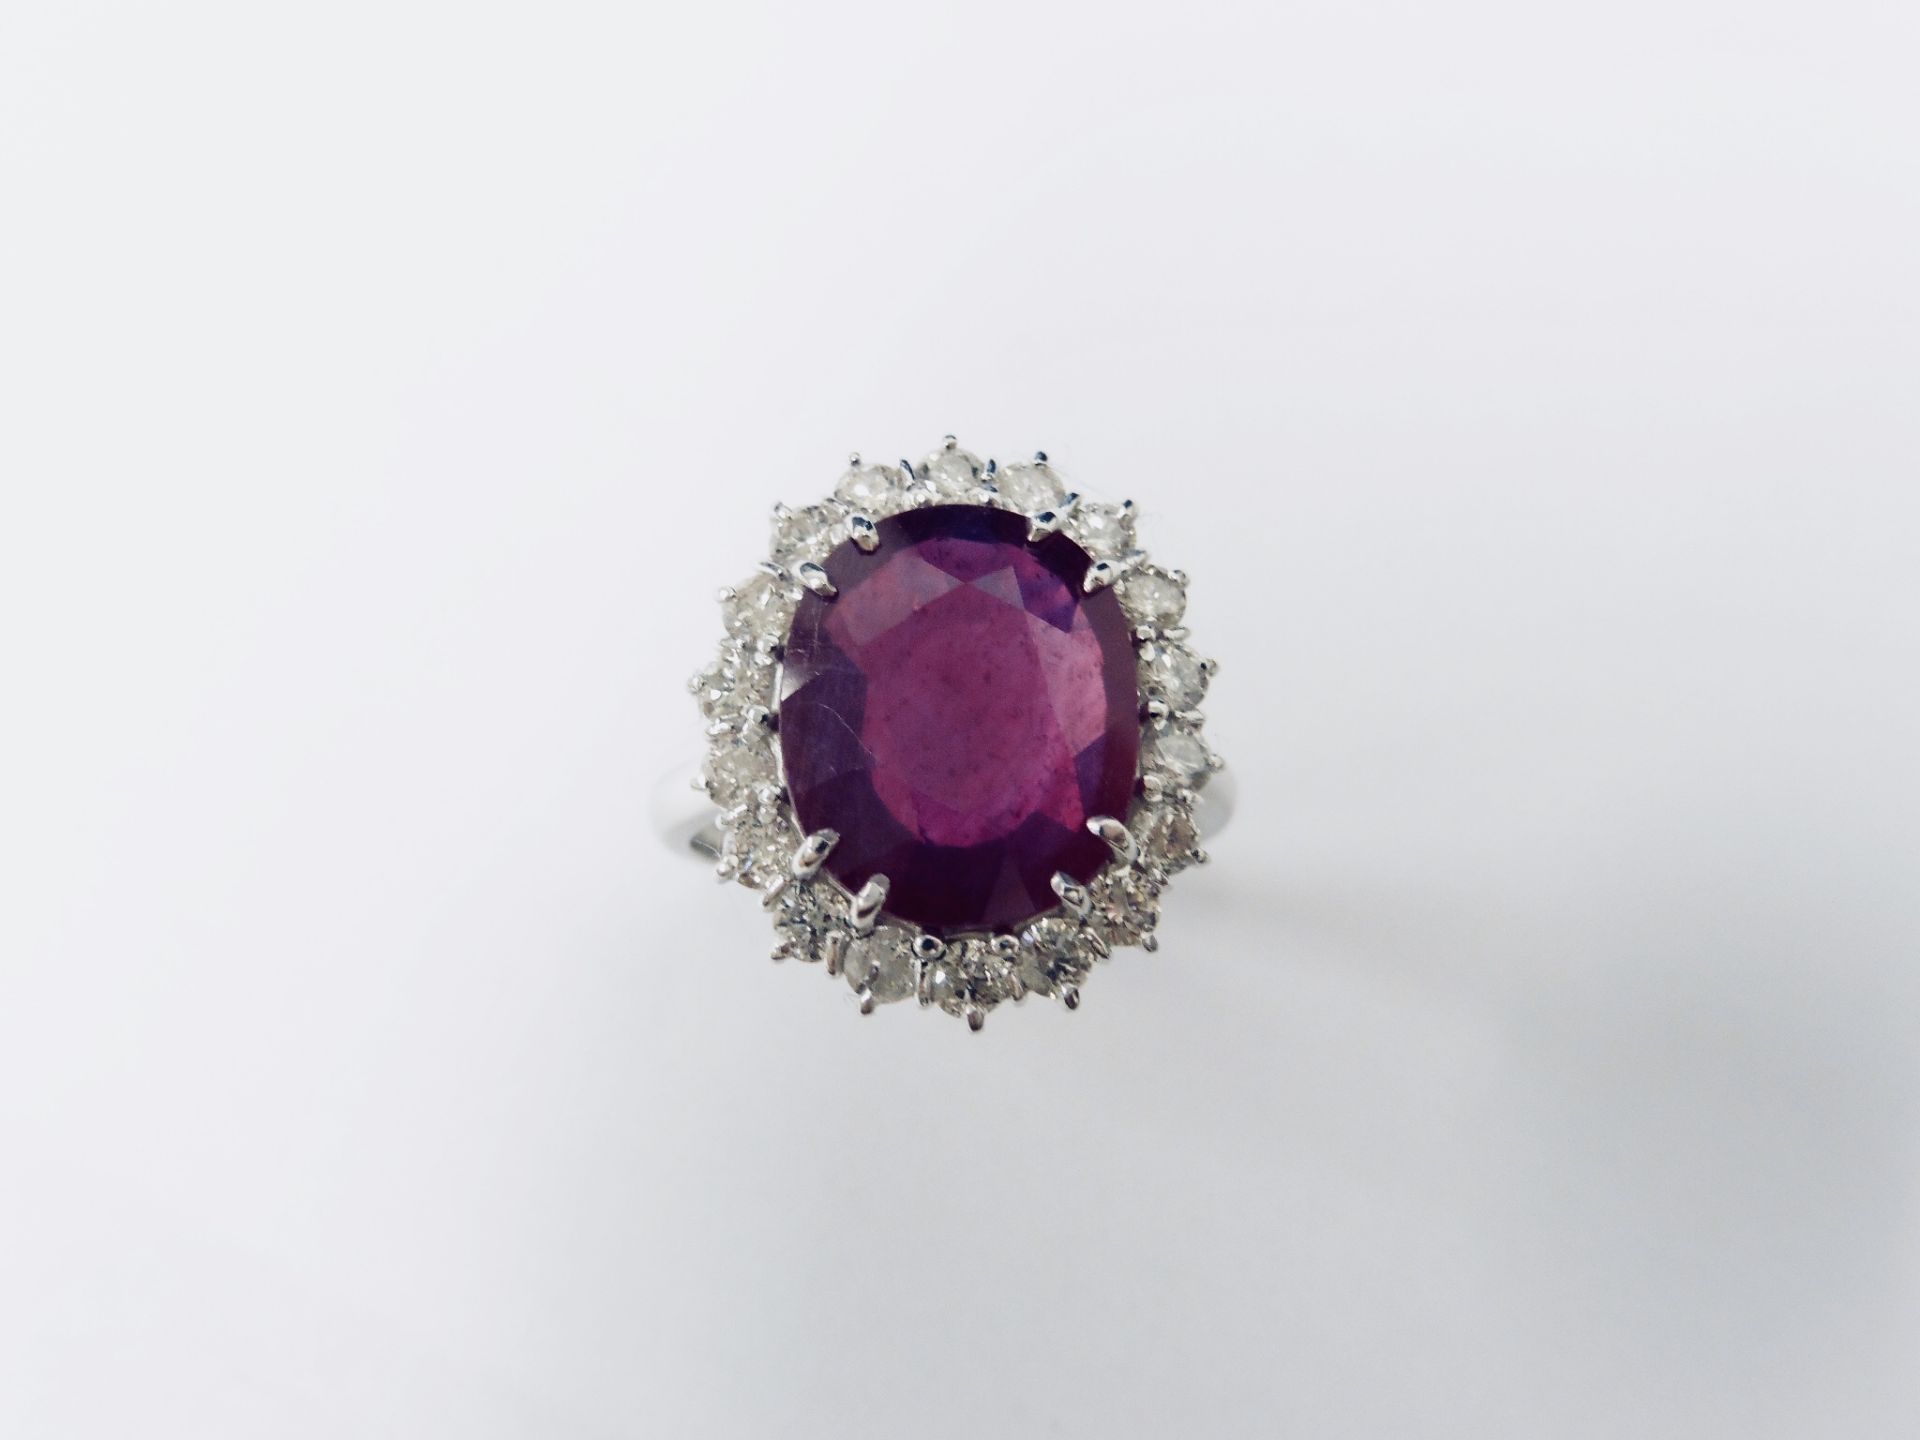 10ct ruby and diamond cluster ring. Oval cut ruby( glass filled) in the centre surrounded by - Image 3 of 5